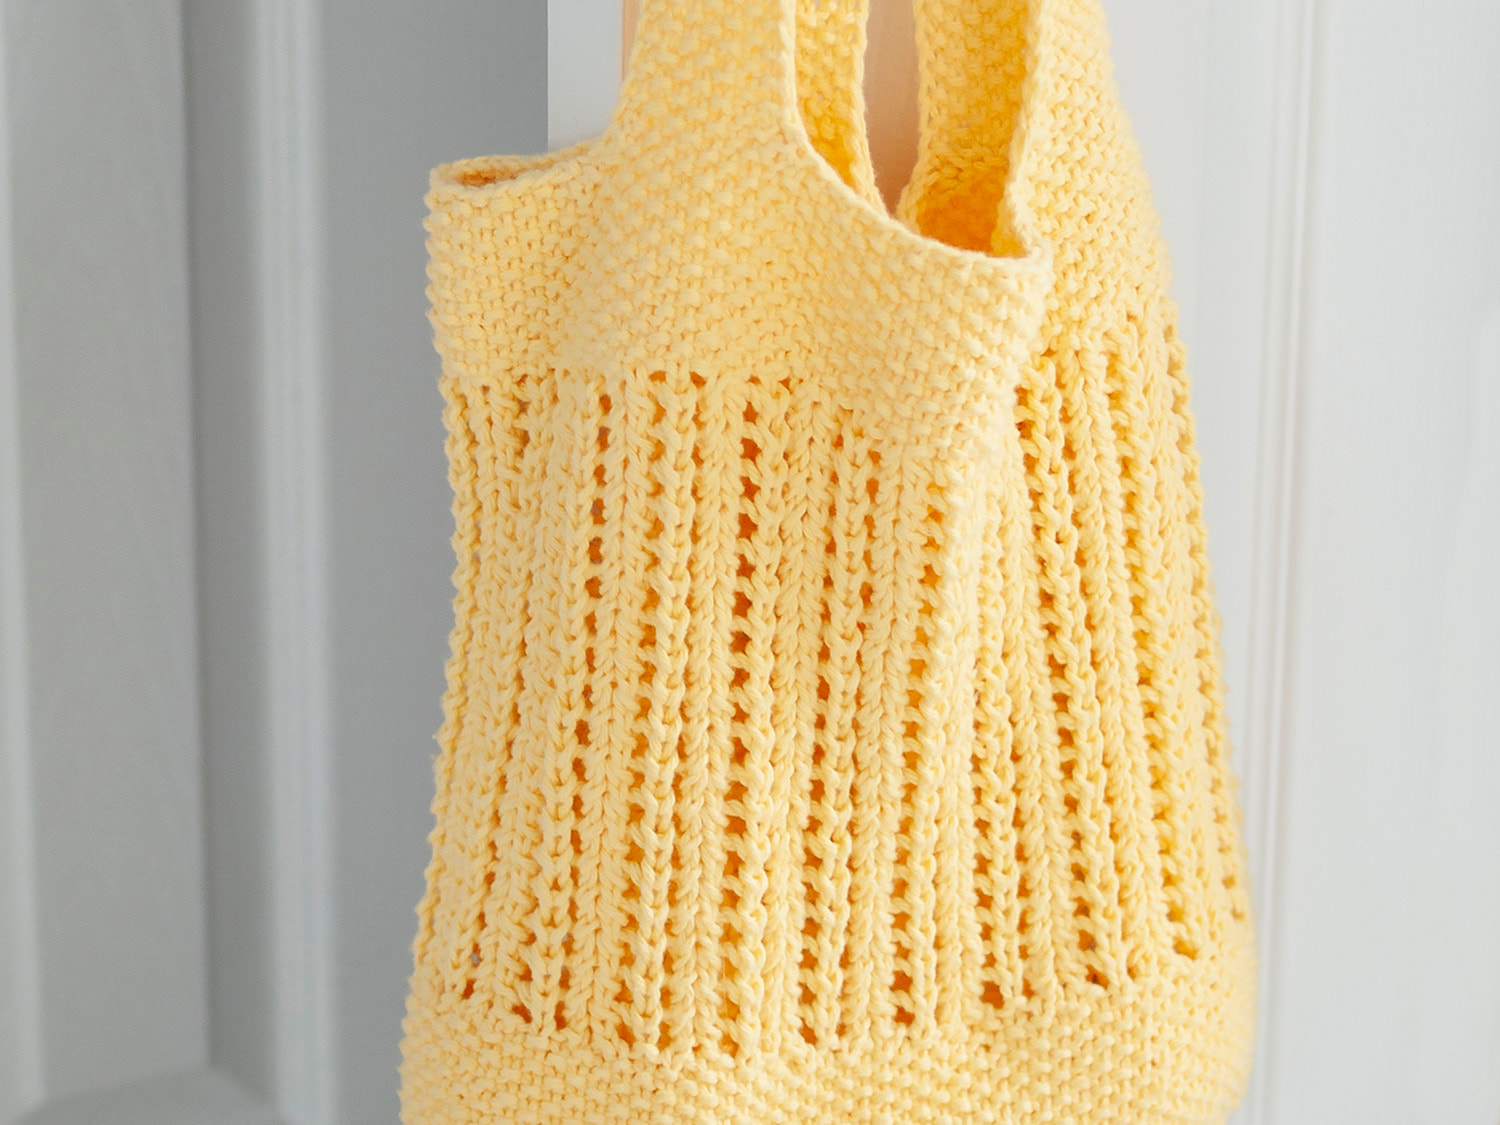 How to Knit a Market Tote Bag (Free Pattern)